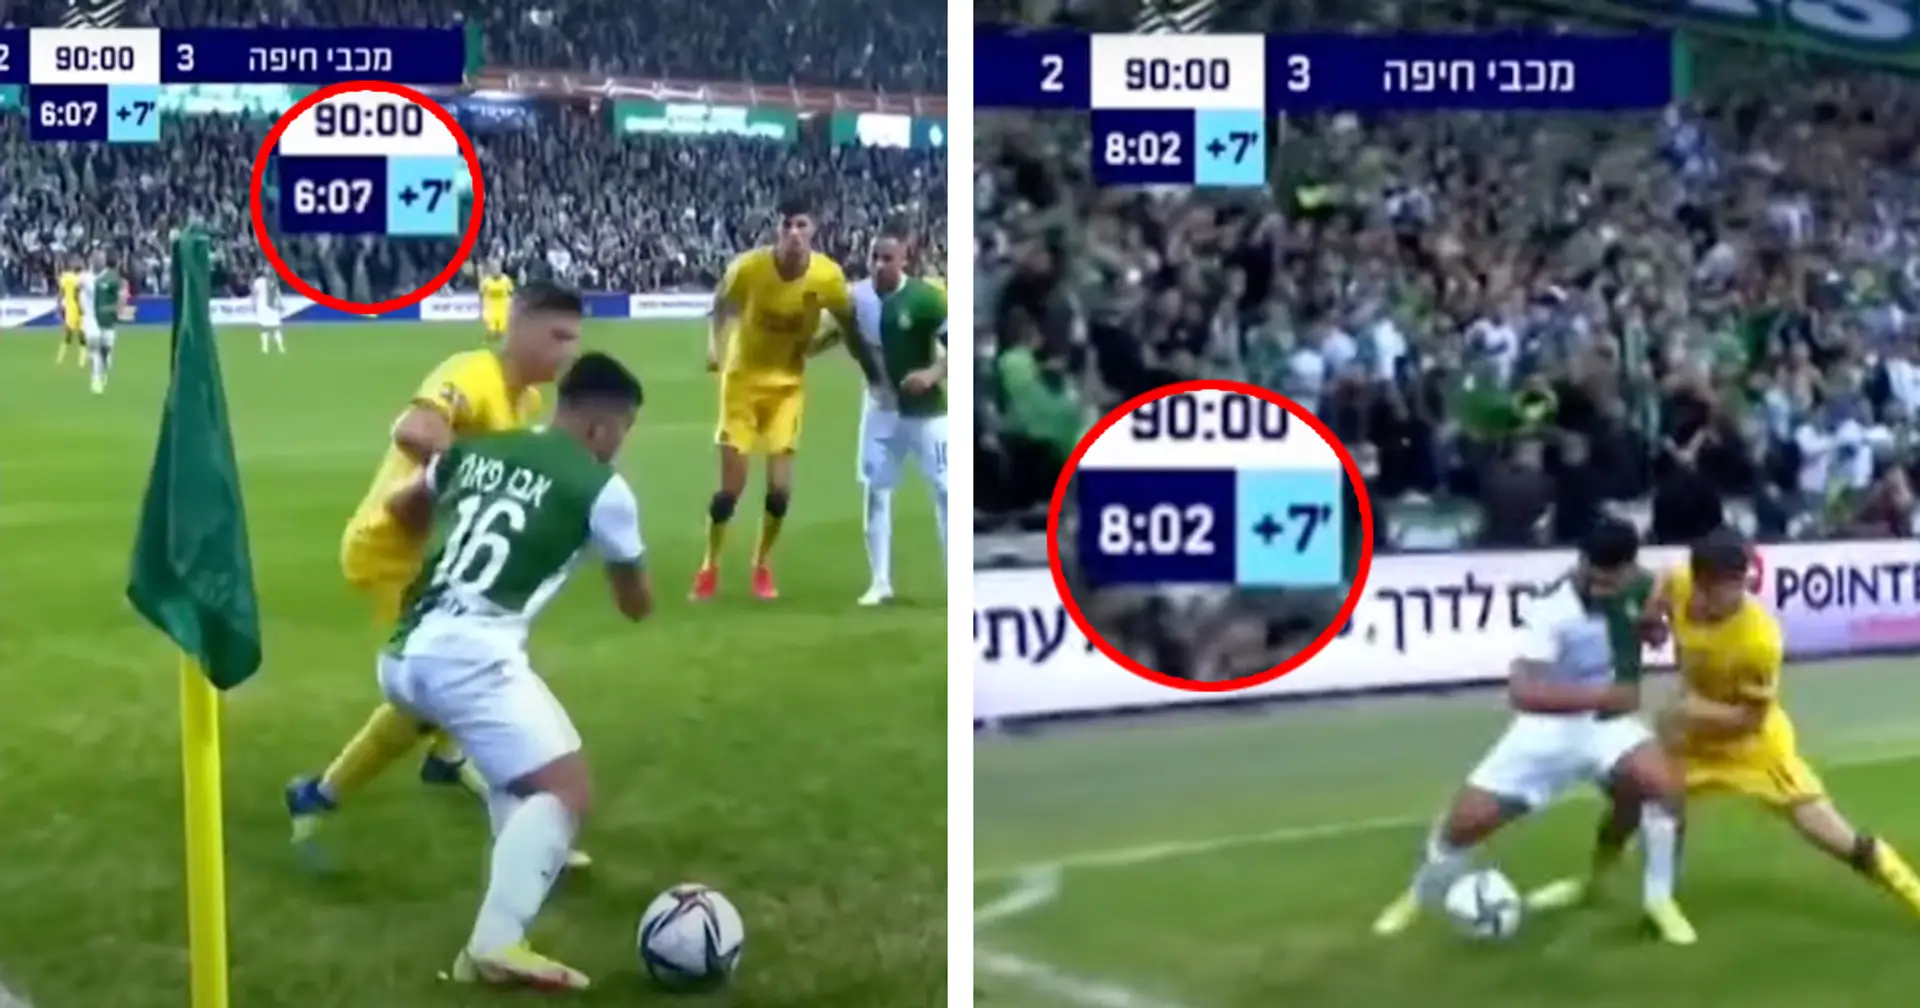 Maccabi Haifa player keeps ball at the corner flag for two minutes straight, greatest time wasting ever 